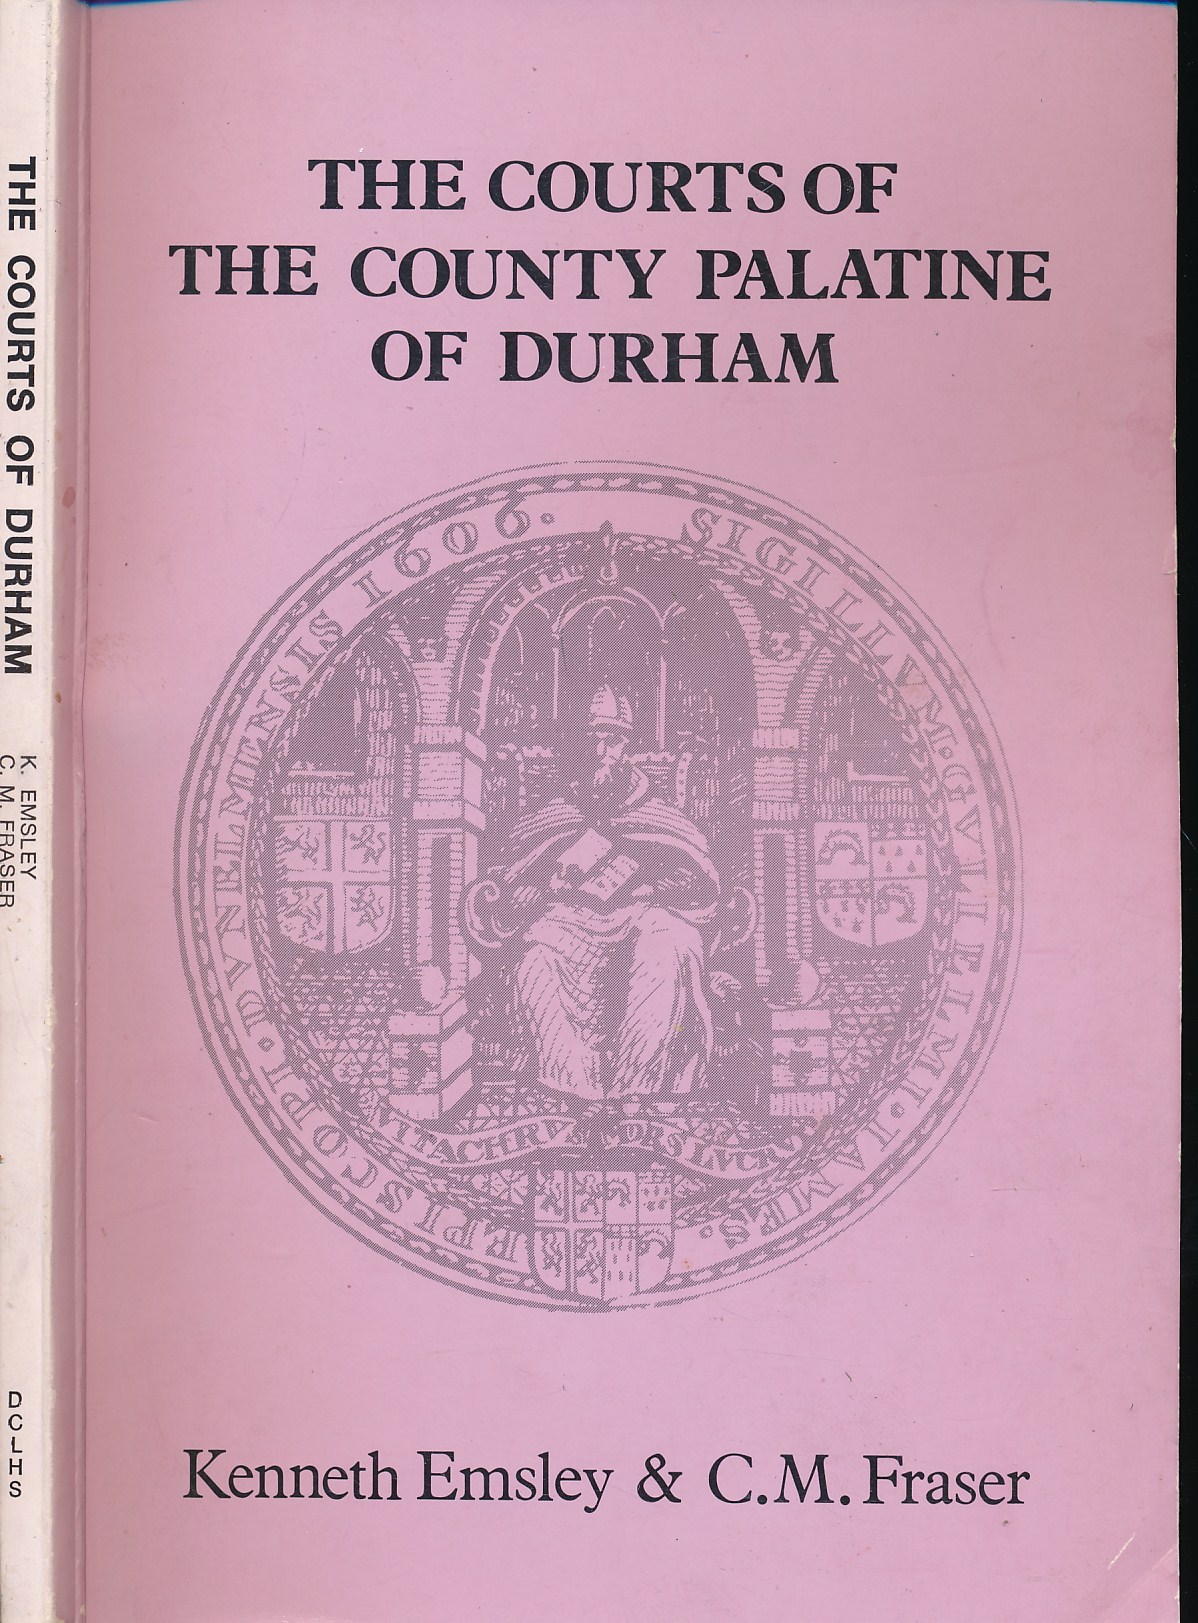 The Courts of the County Palatine of Durham